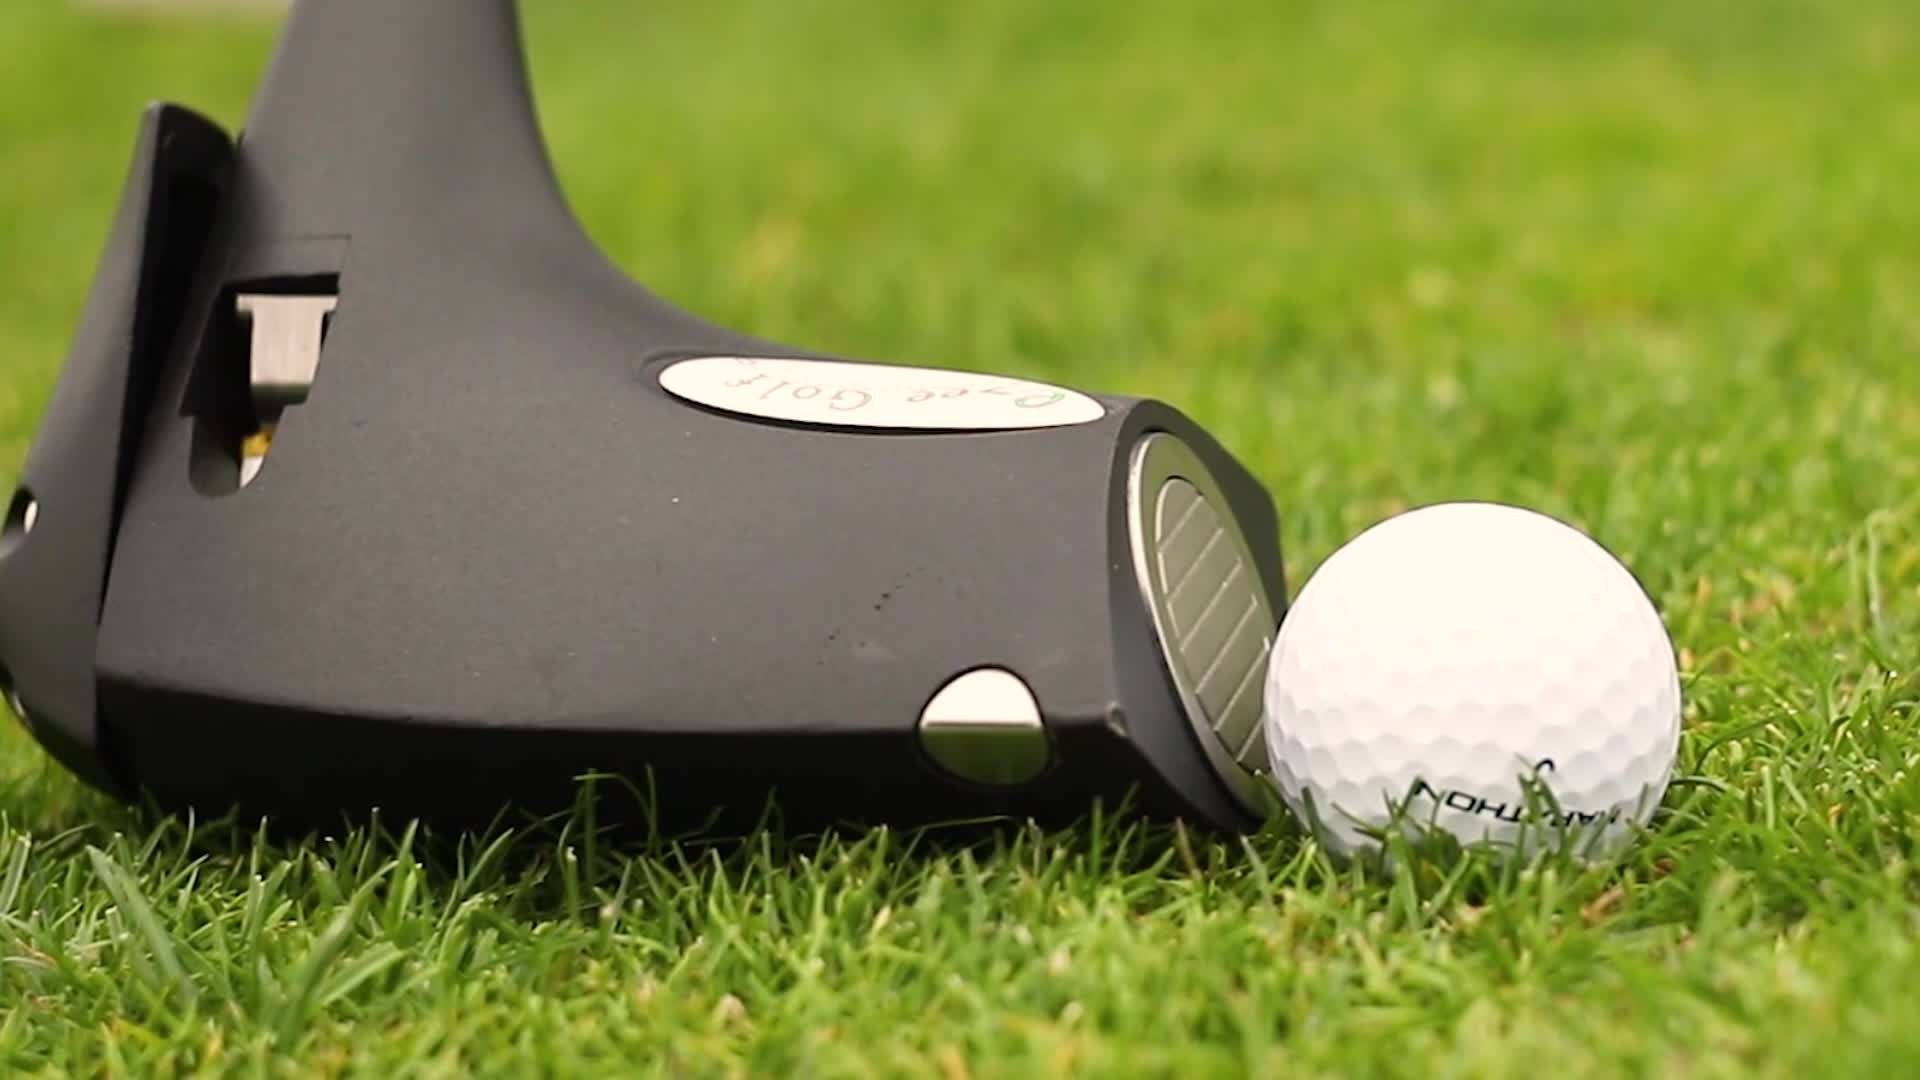 This Golf Club Hits The Ball For You - video Dailymotion